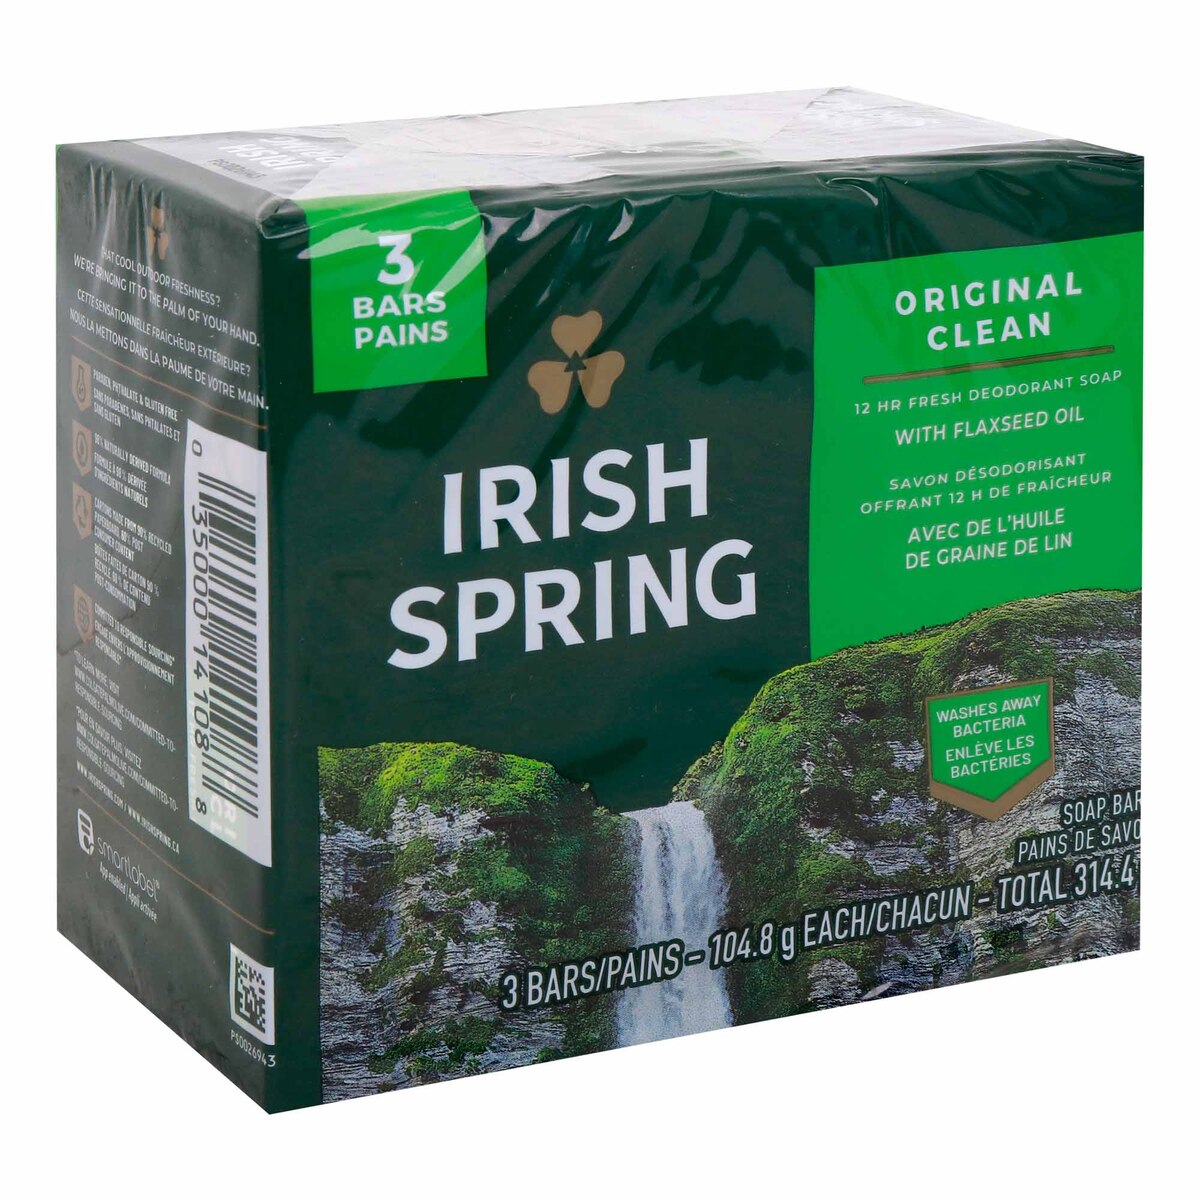 Irish Spring Original Clean with Flaxseed Oil Soap Bars 3 pcs 314.4 g